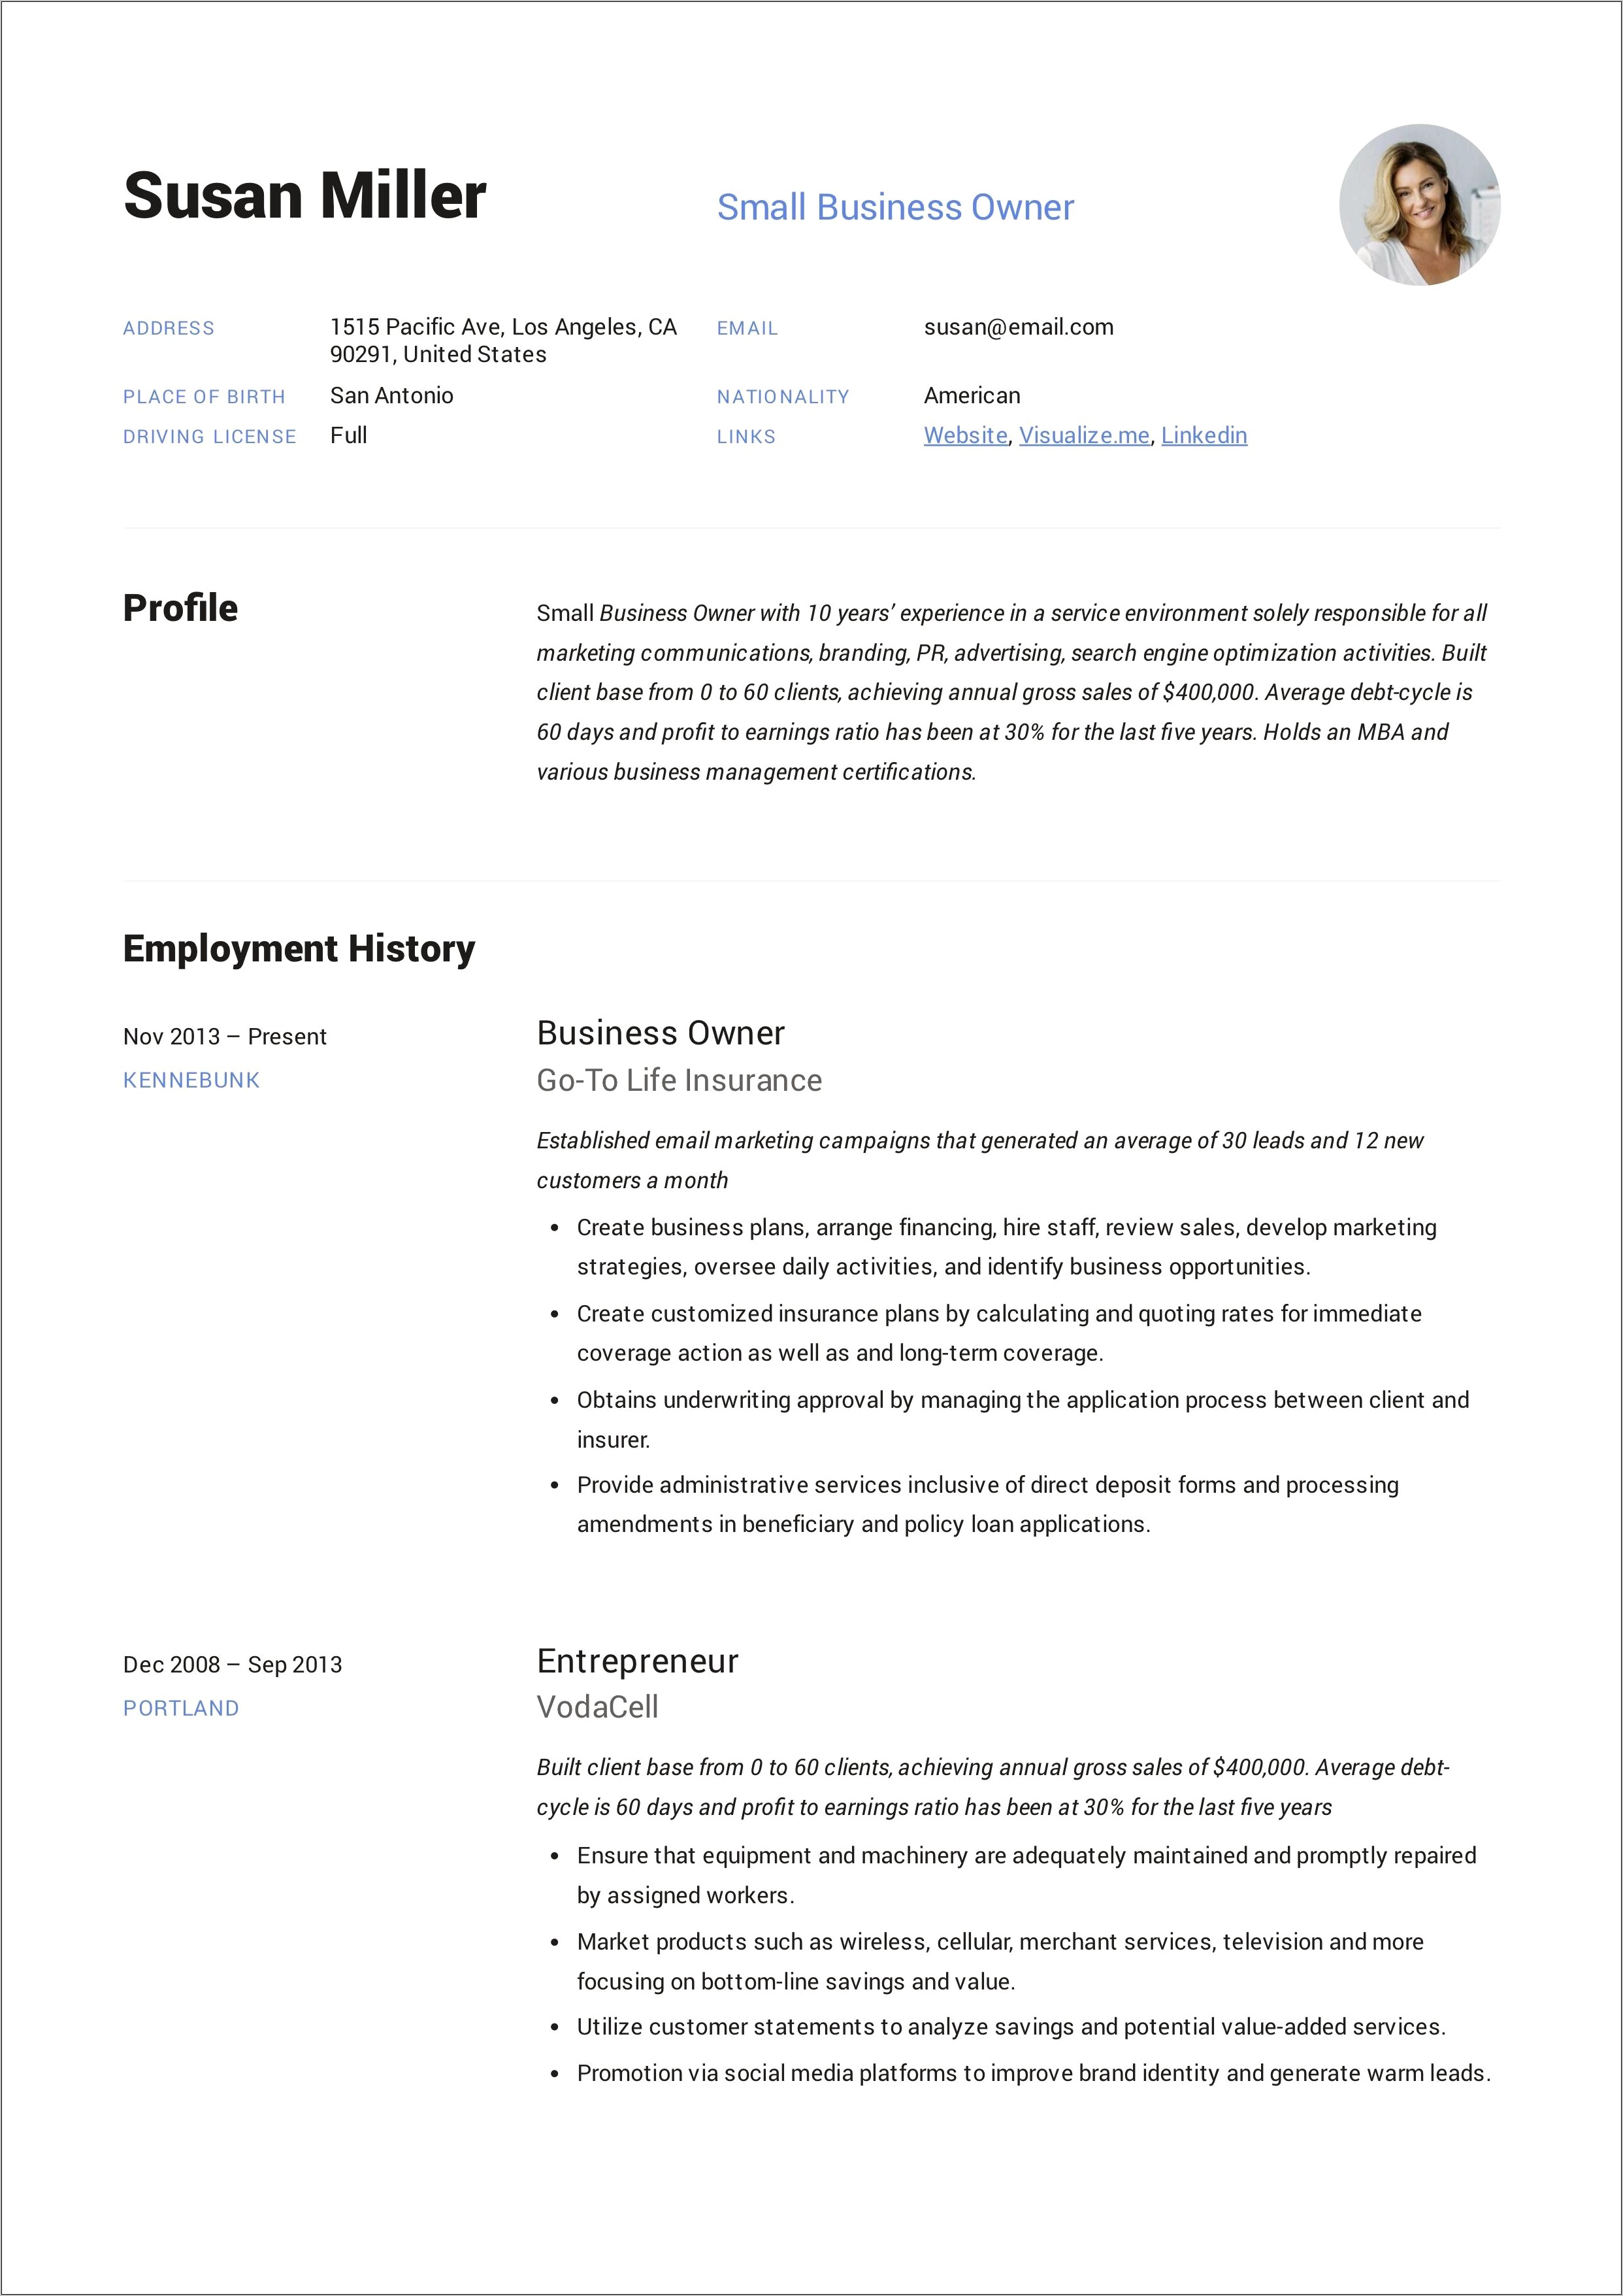 Sample Executive Summary For Business Entrepeneur Resume